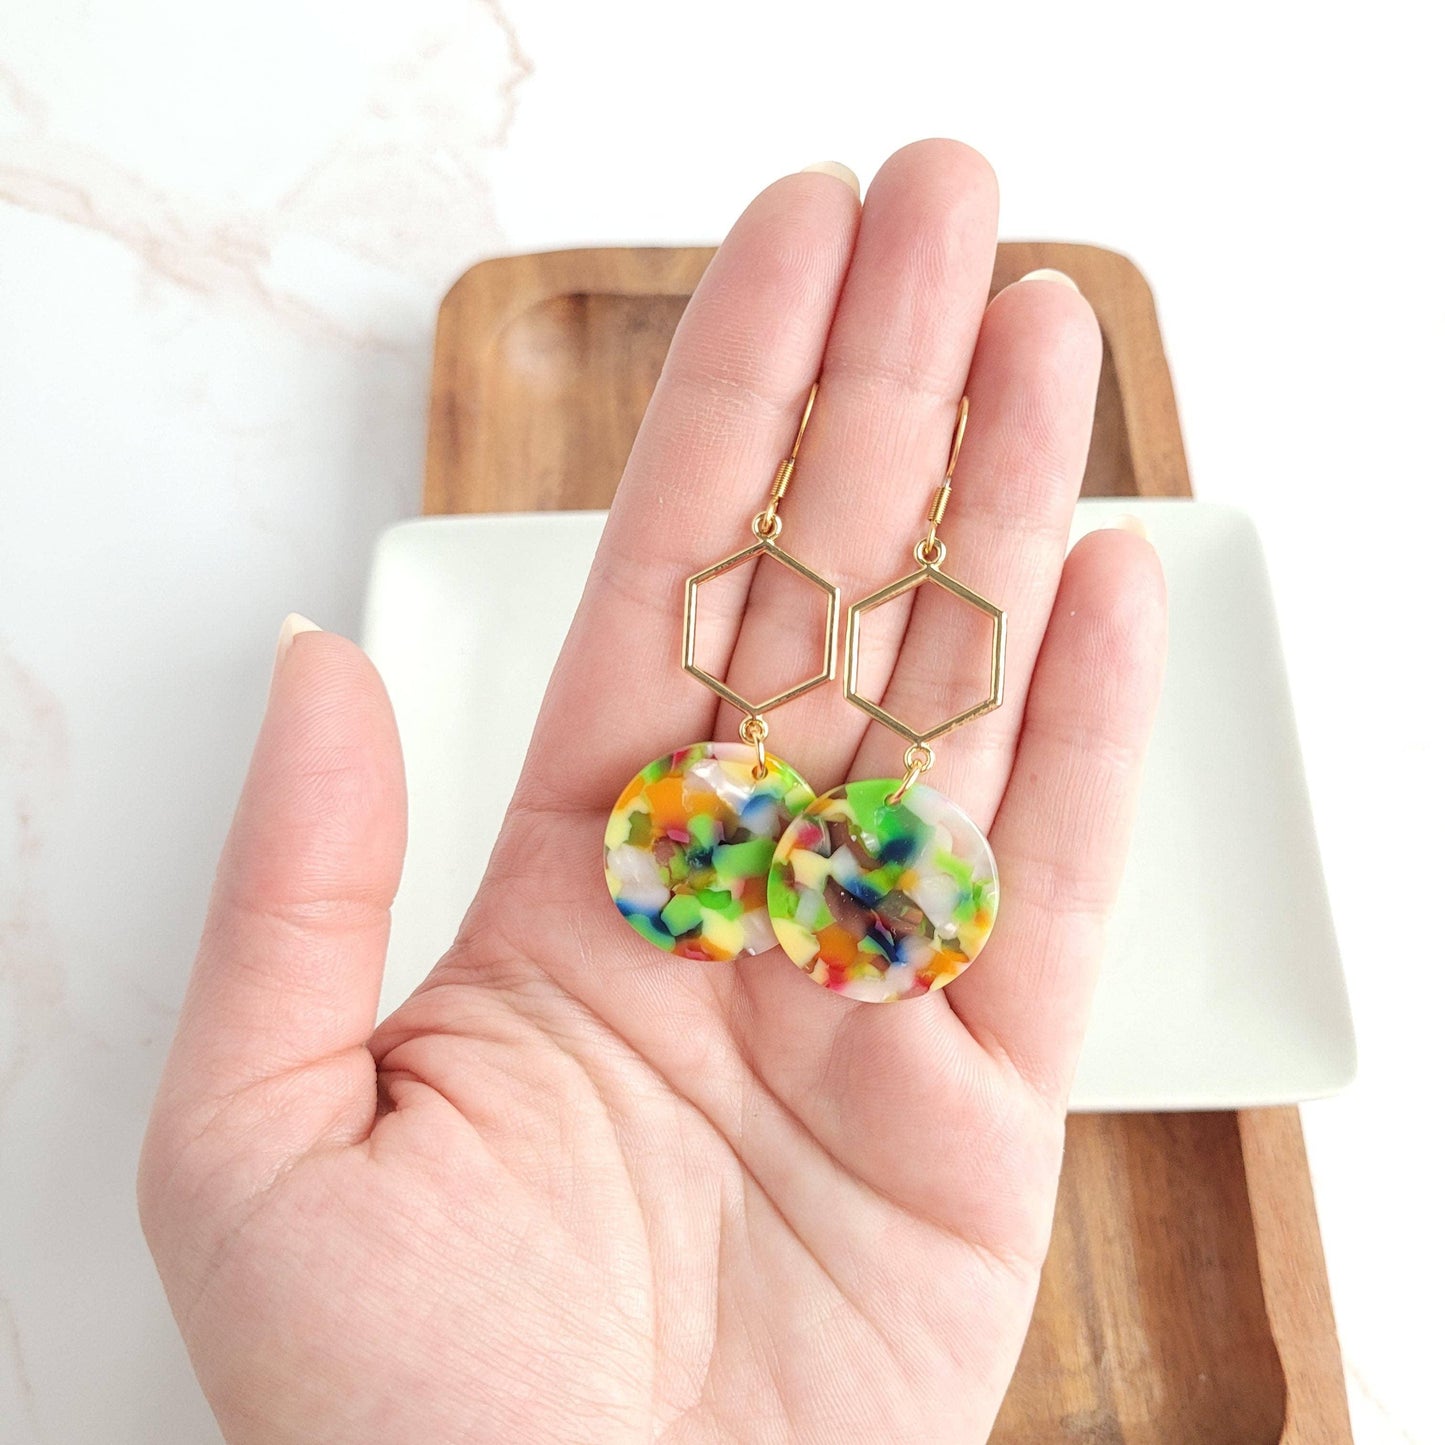 Layla Earrings - Tropical // Spring, Summer, Mother's Day - HERS